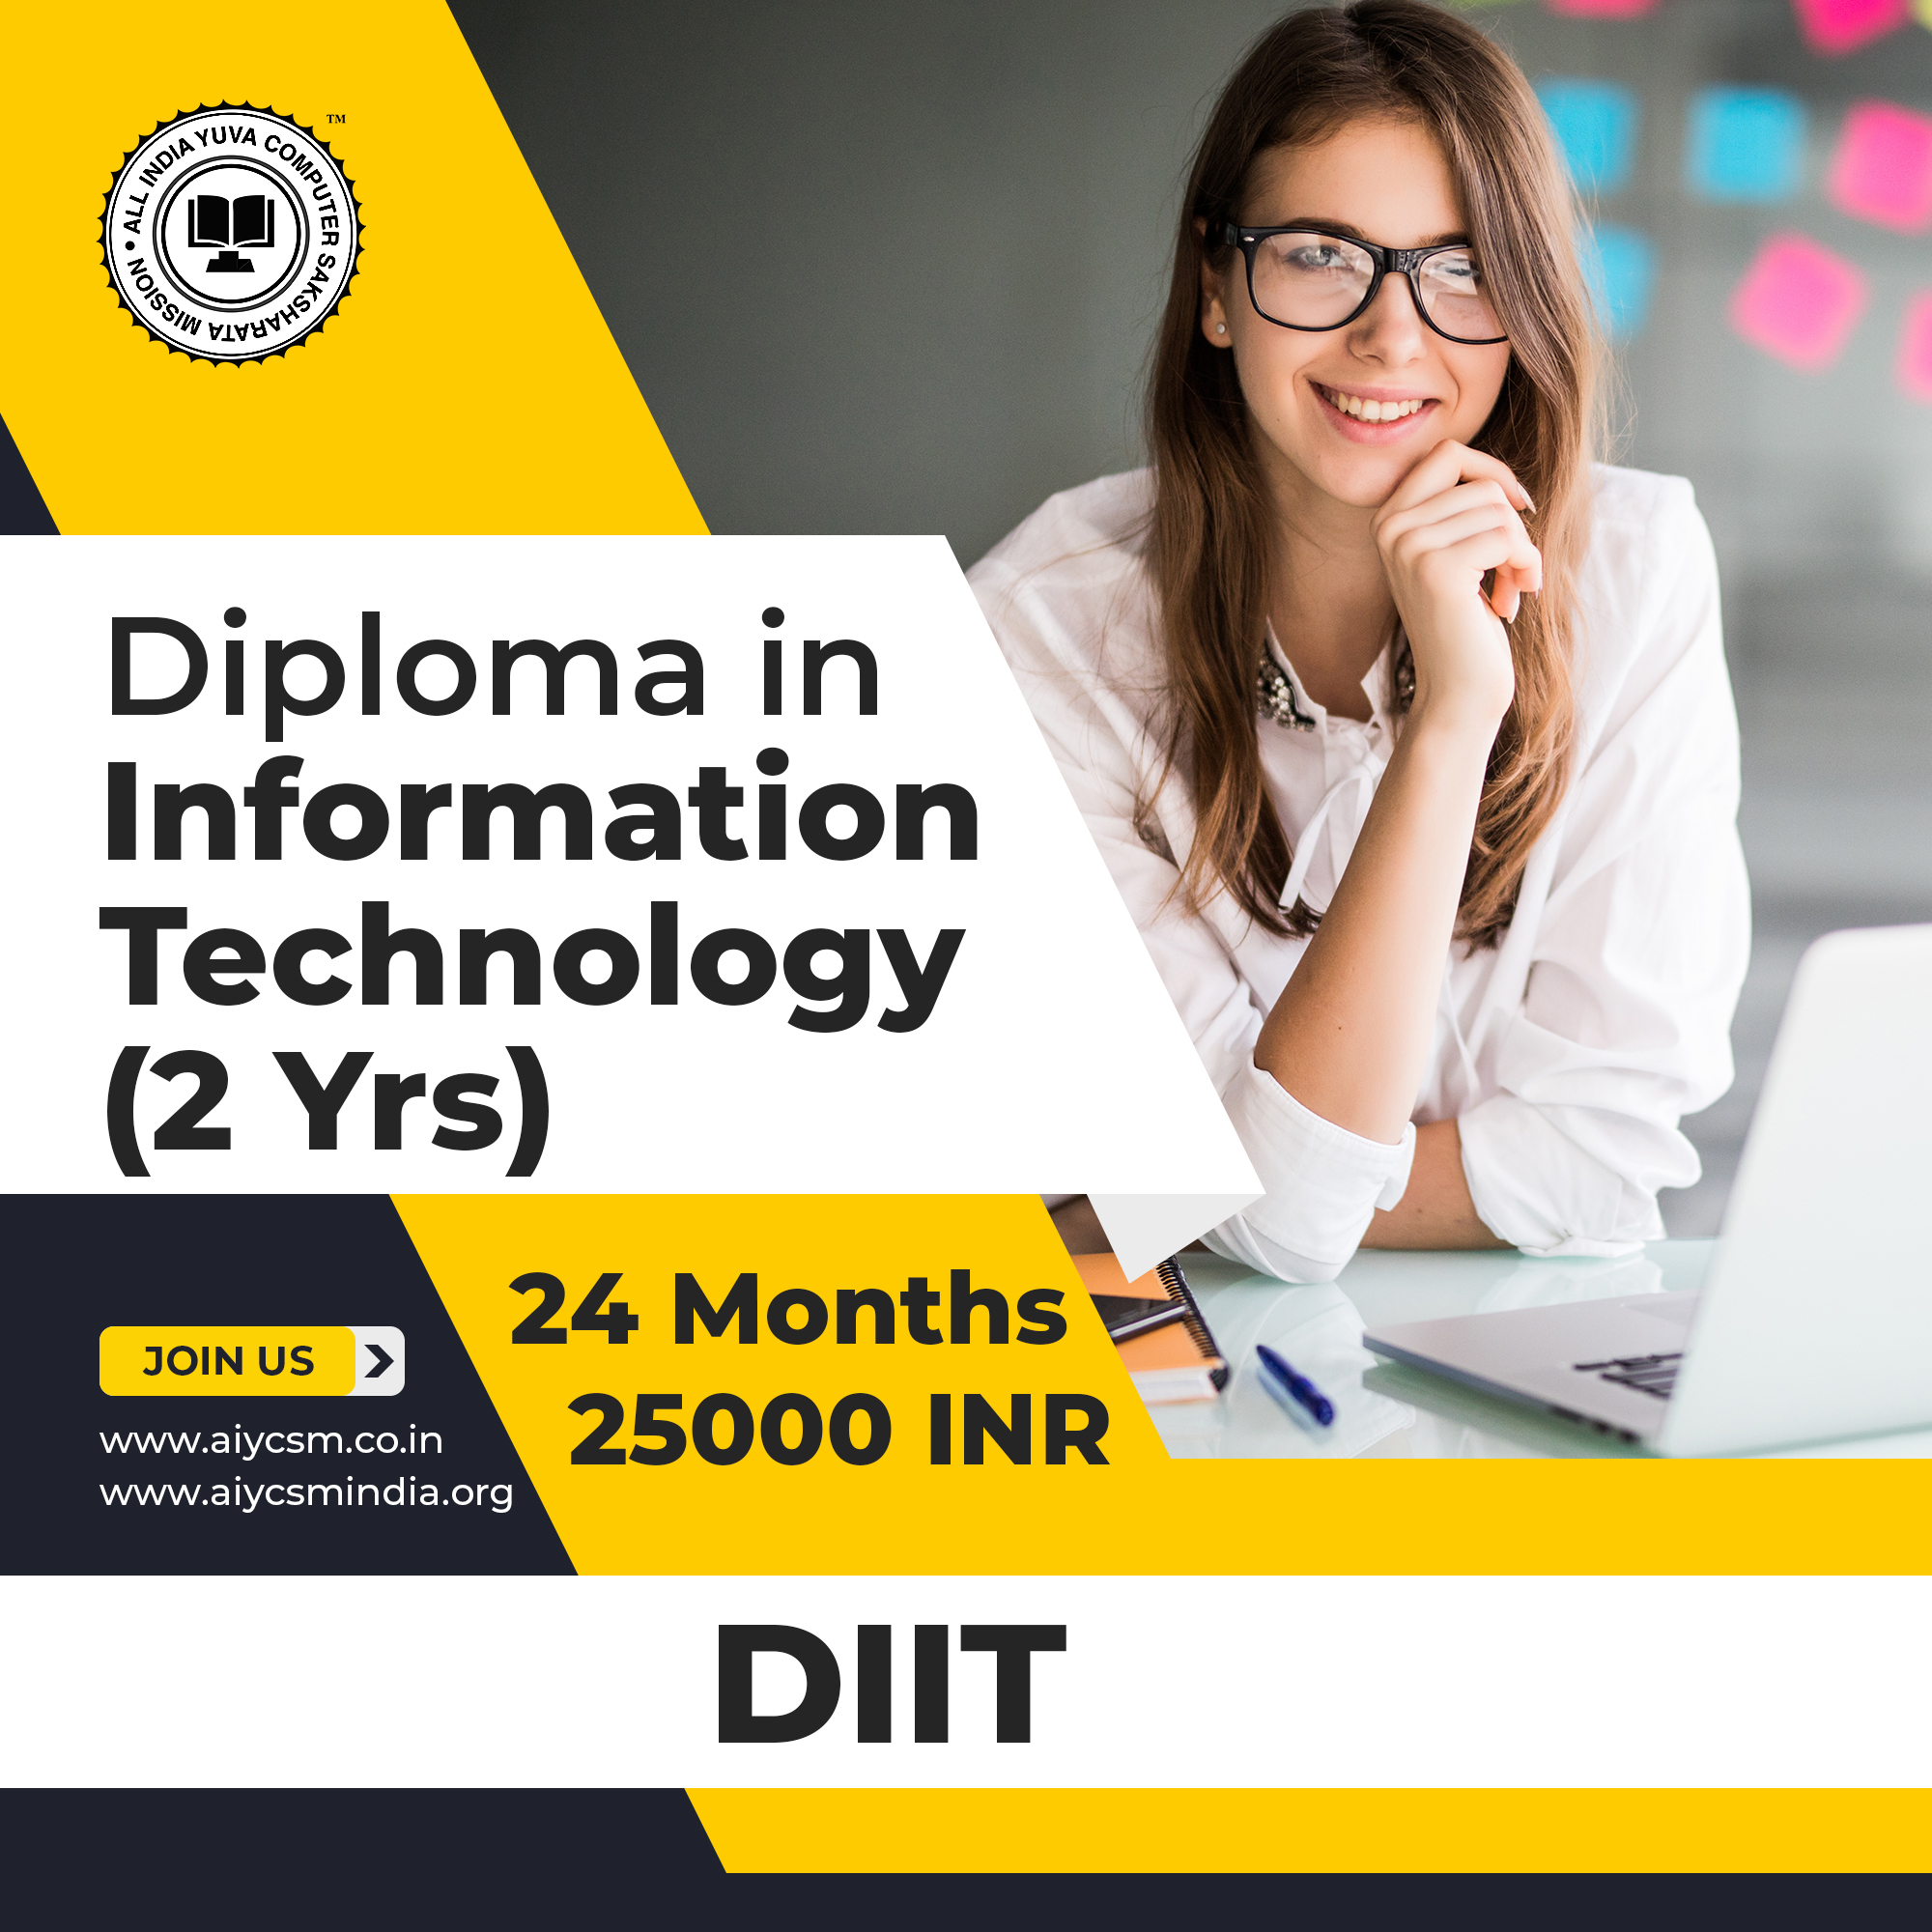 Diploma in Information Technology (2 Yrs)